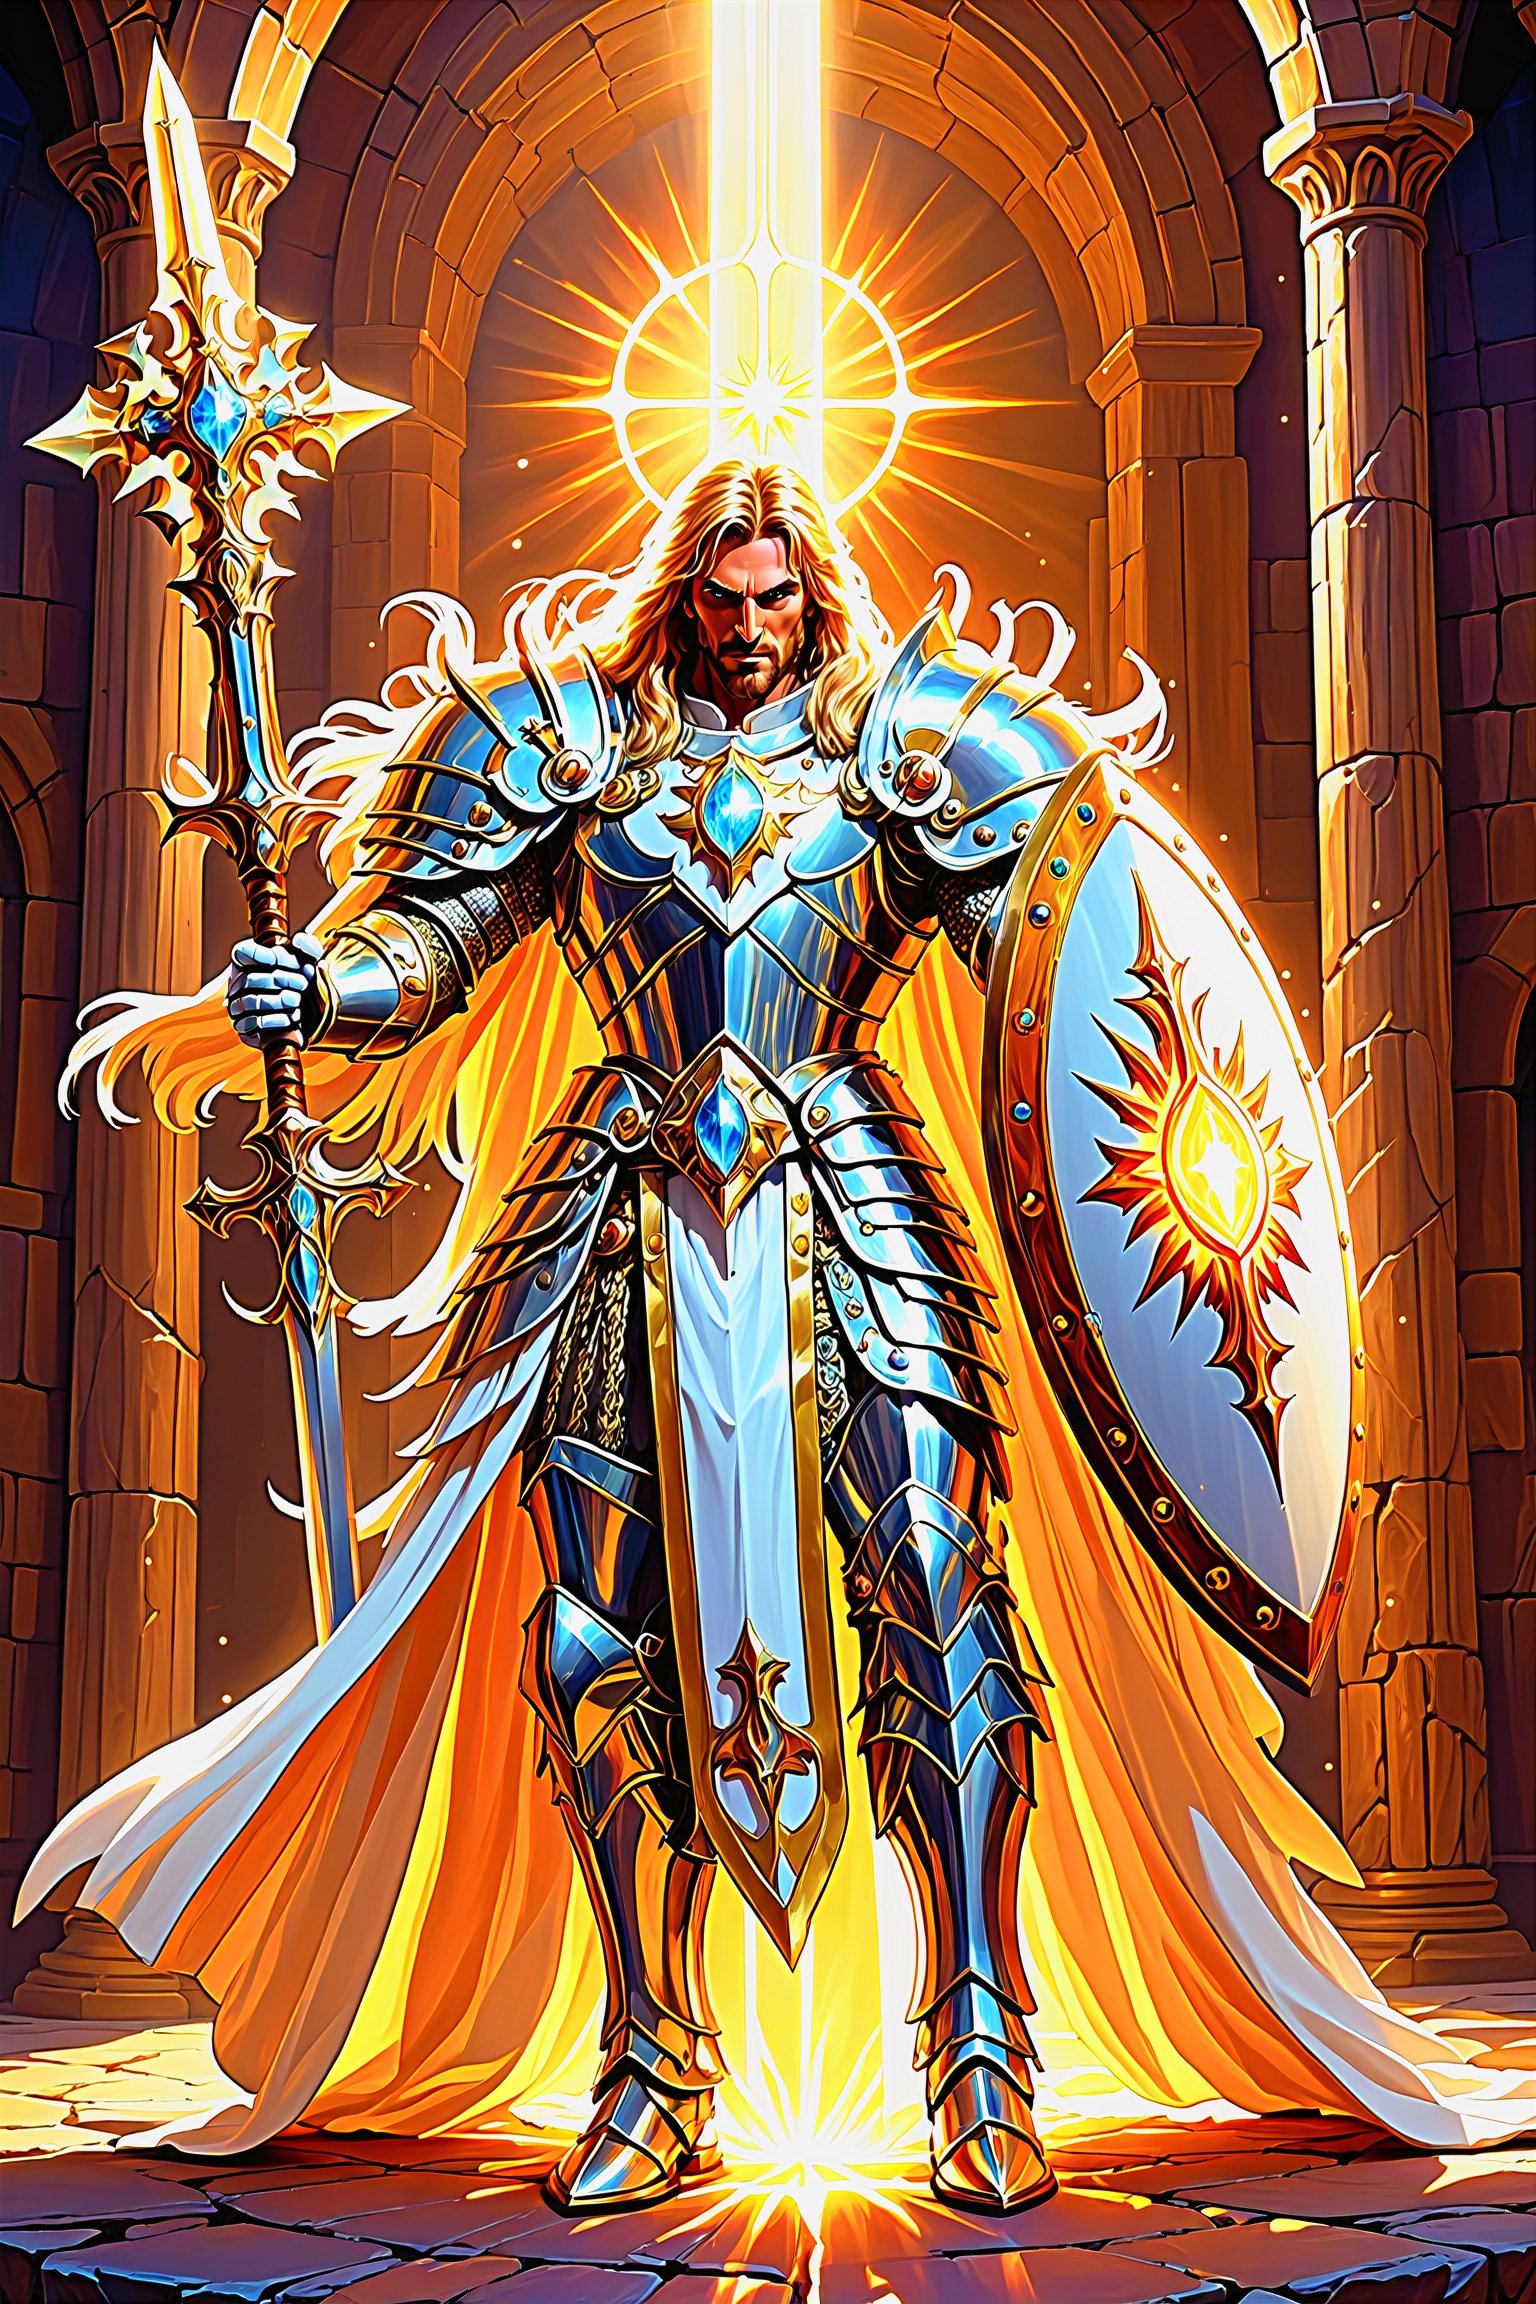 A paladin glowing holy light in Everquest classic box art style, power metal manowar judas priest iron maiden megadeath death carcass cover art style, best quality, psychedelic, vivid colors, trippy, colorful, original, unique, intriguing, showcase the radiant glory of this holy crusader, gleaming pristine shimmering plate armor, shield, glowing so brilliantly radiantly blinding white holy divine light from raised warhammer in hand, angelic divine heavenly holy city in the sky sunlight rays beams of light celestial beings ultimate godly divine power of justice and good and truth and righteousness, please get it right this time, psychedelic alien worlds, sprawling cosmic colorscapes, 3d toon style,   